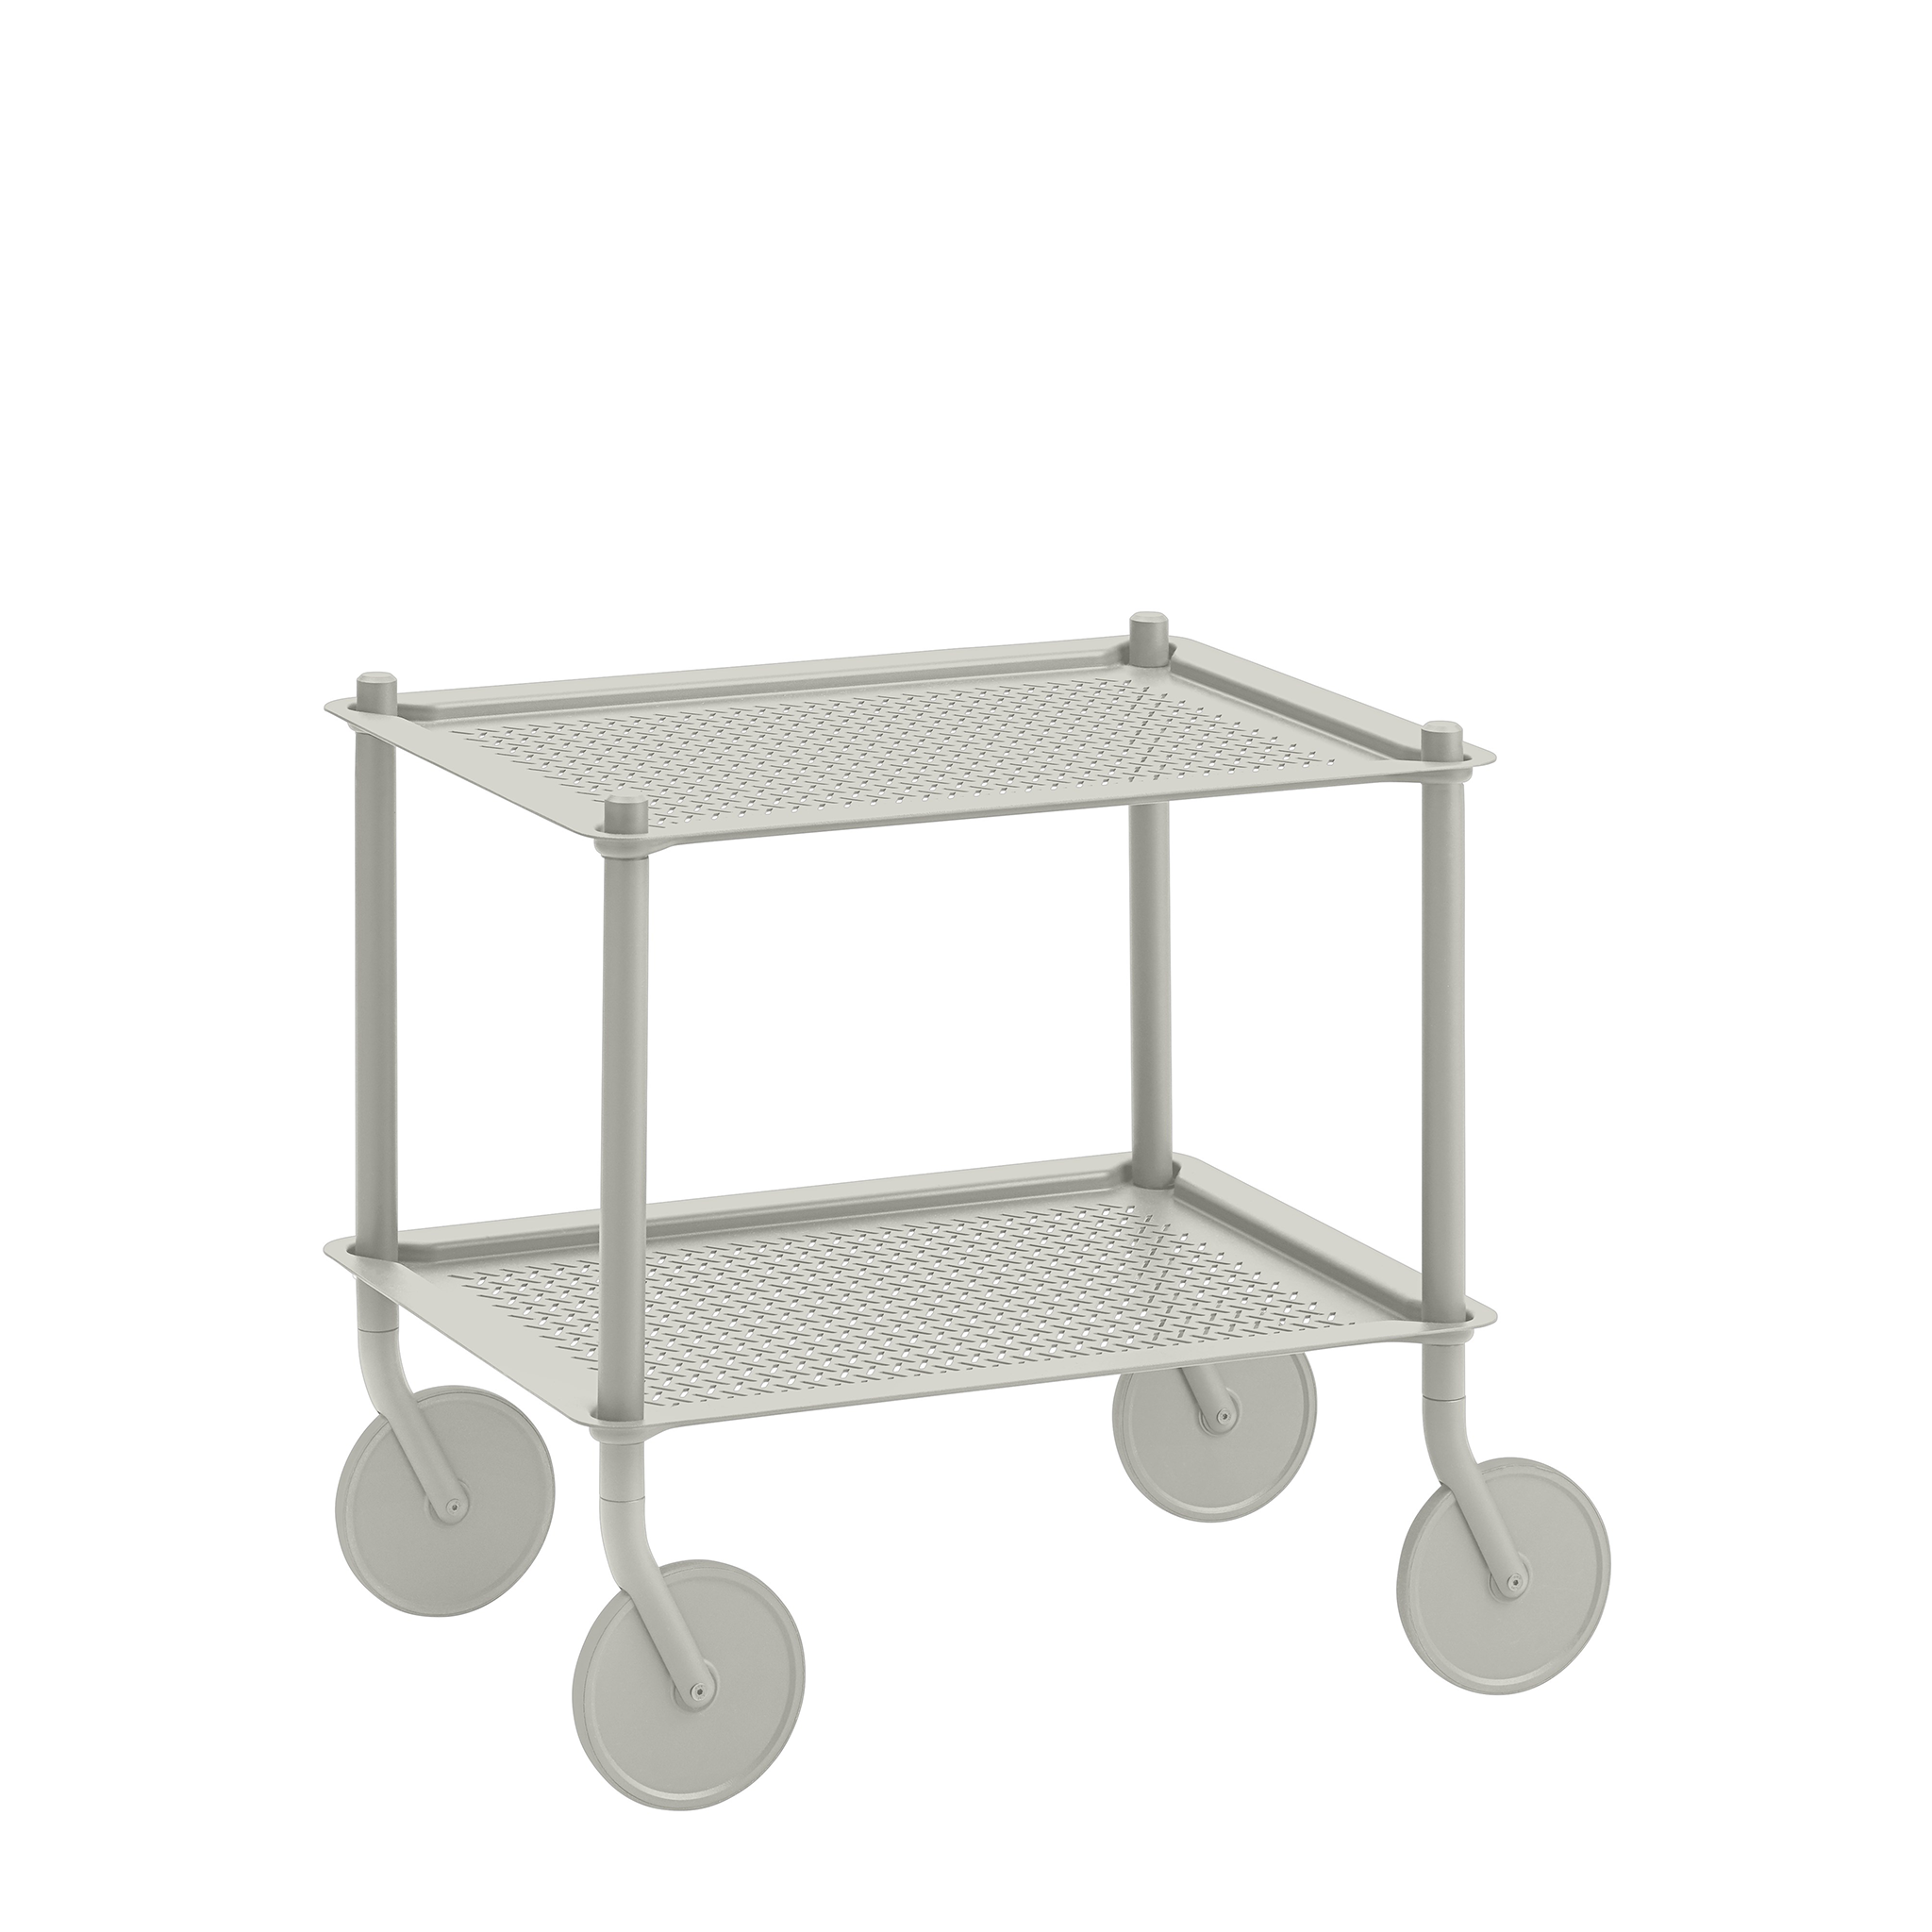 Flow Trolley by Normal Studio for Muuto